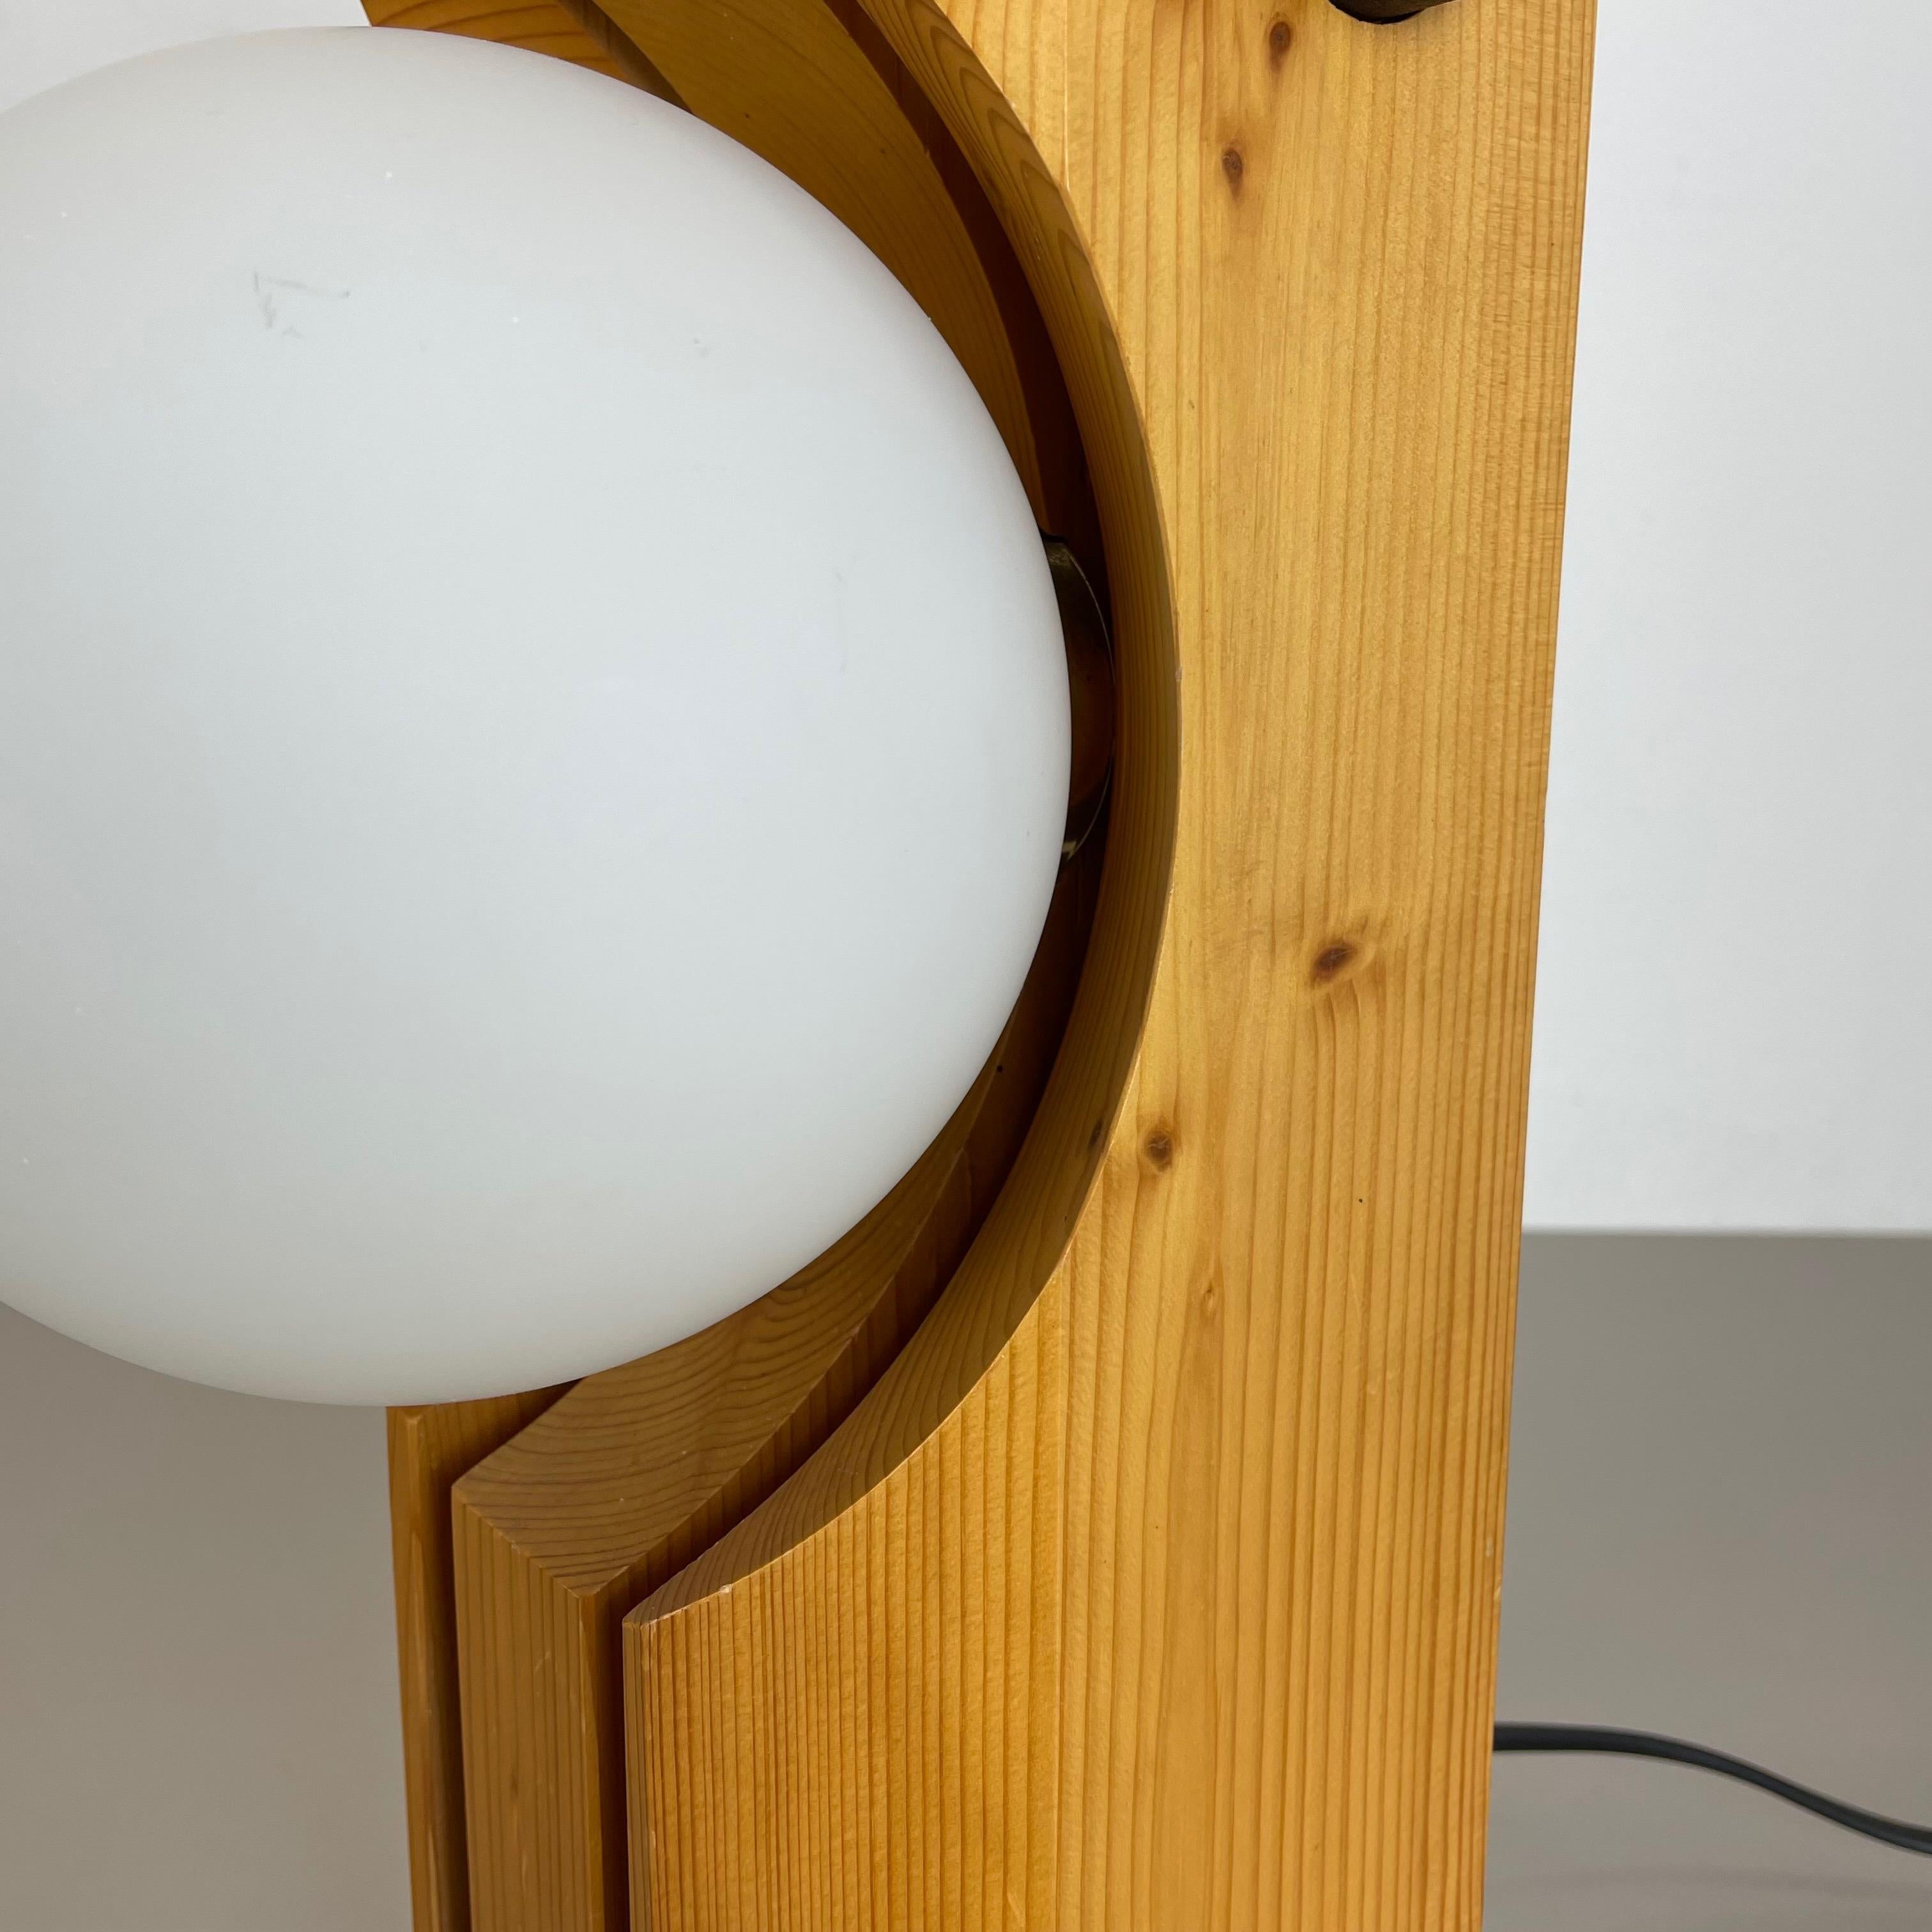 Large Organic Sculptural PINE Wooden Table Light by Temde Lights, Germany 1970s For Sale 4